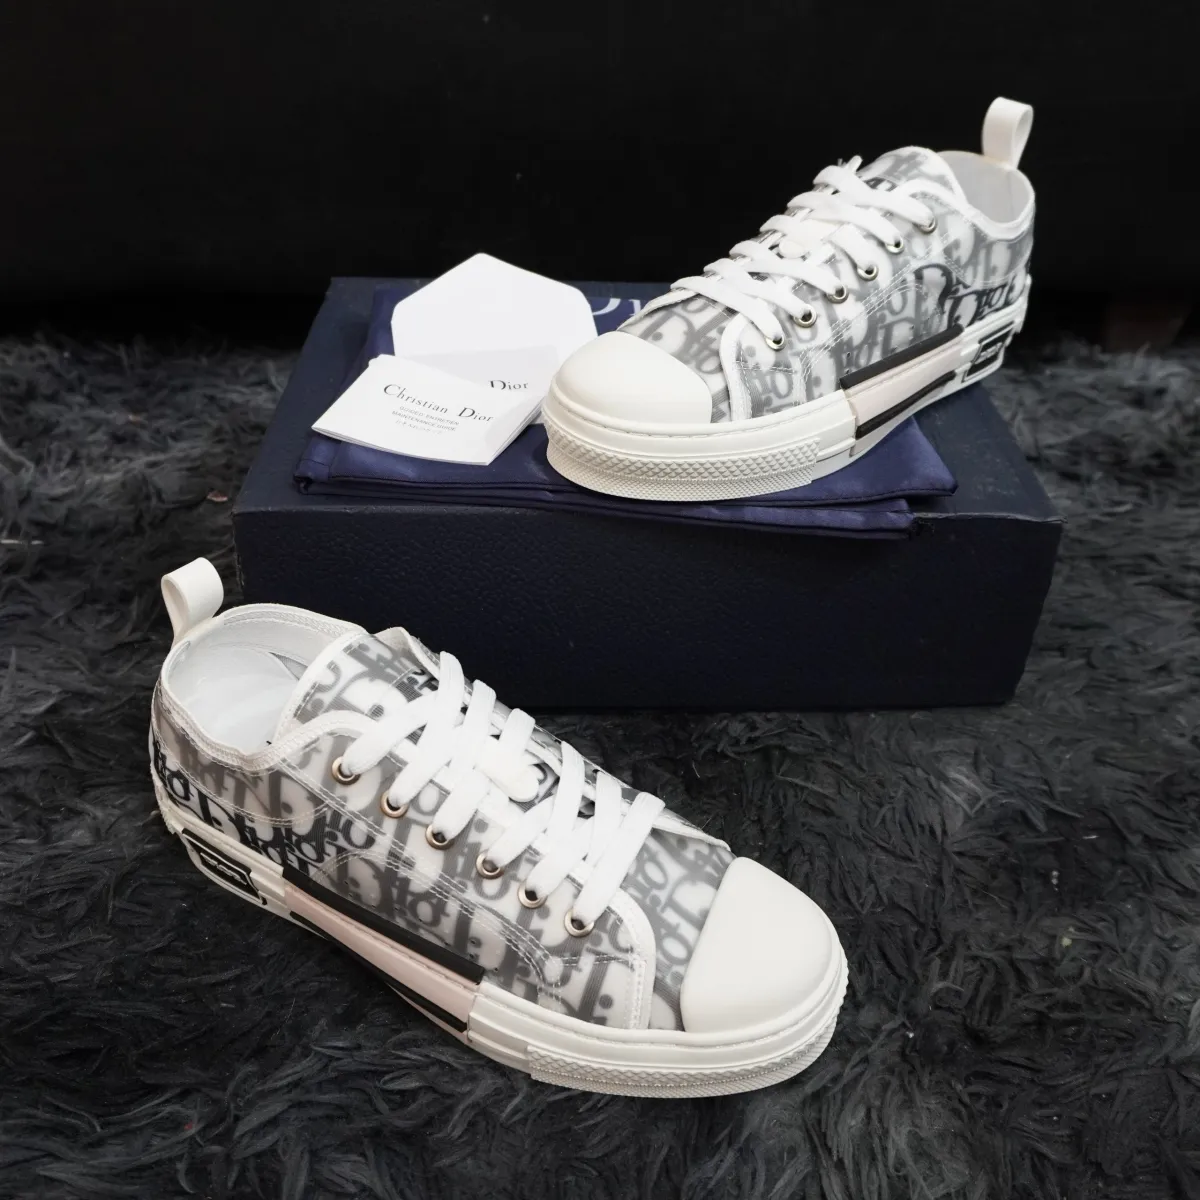 B23 HighTop Sneaker Black and White Dior Oblique Canvas with Black  Calfskin  DIOR GB